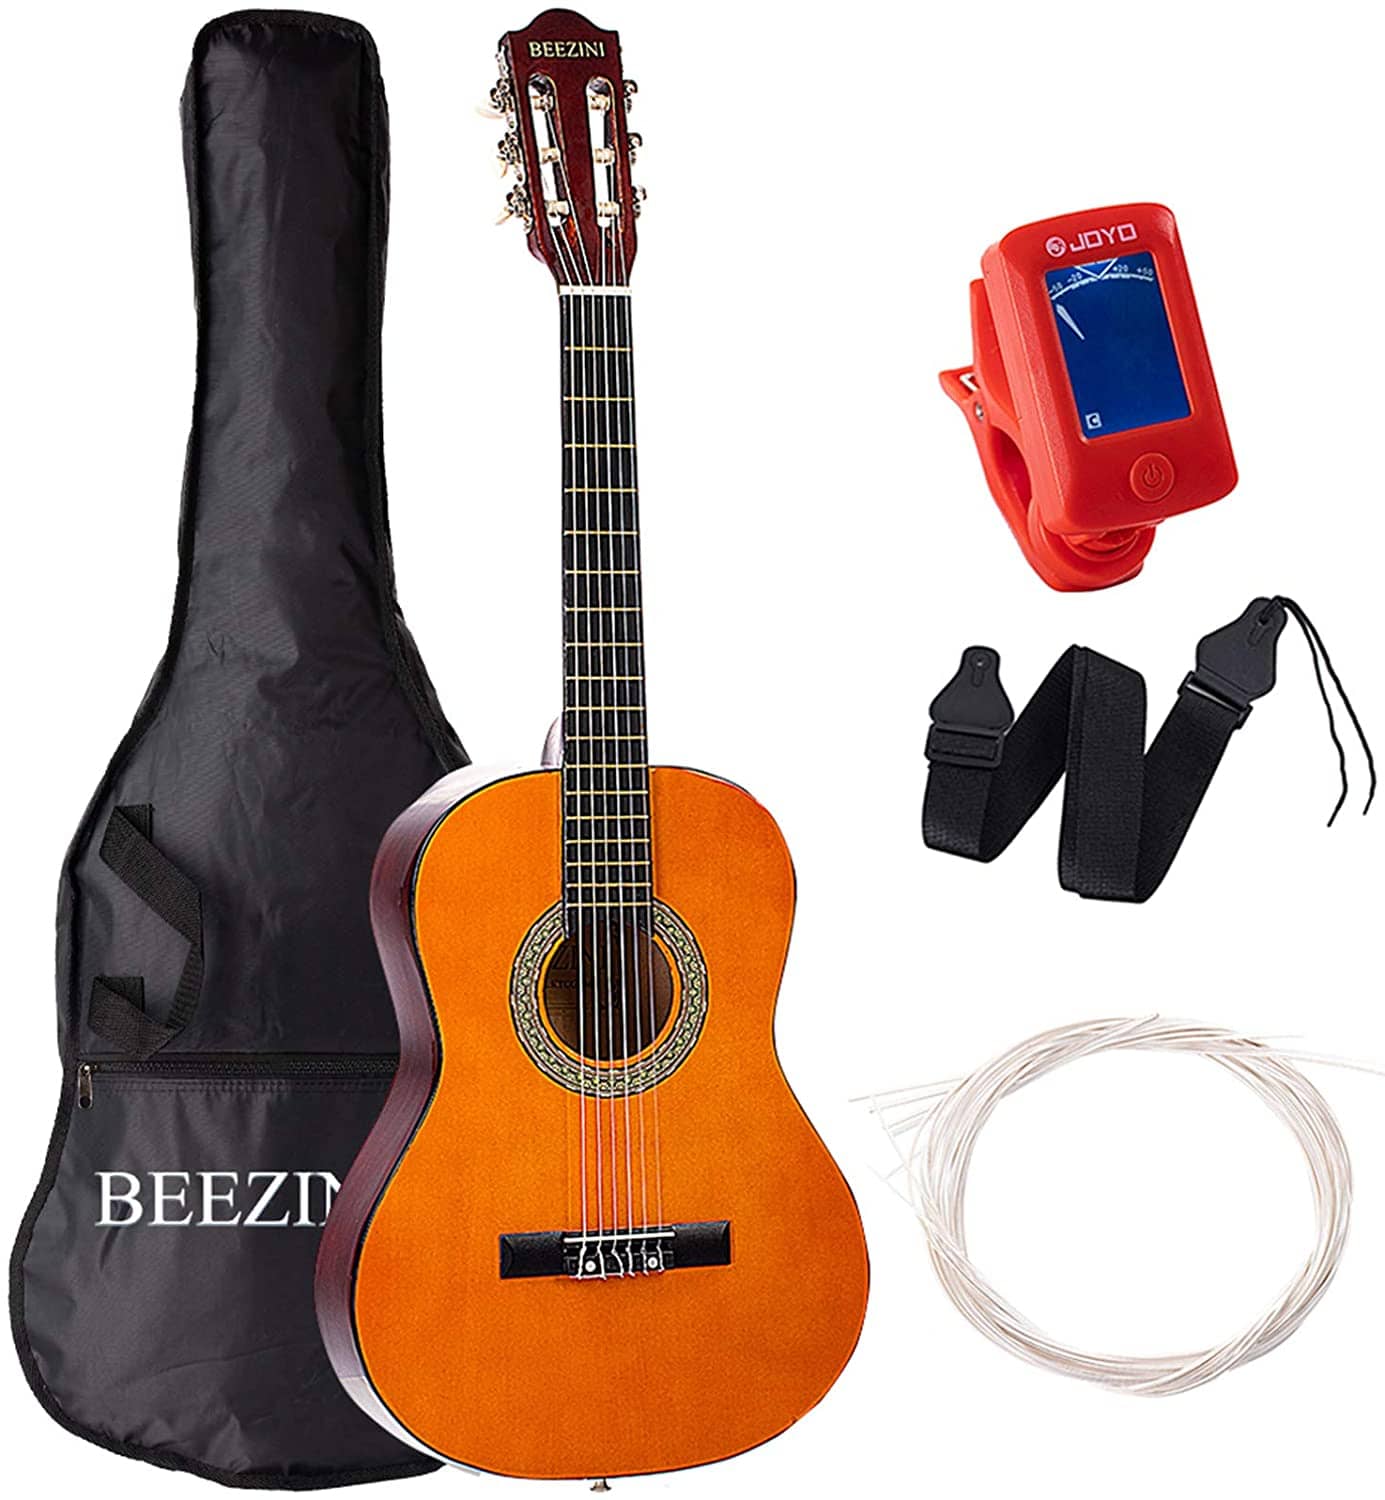 Classical Guitar Acoustic 3/4 Size 36 inch Guitar 6 Nylon Strings Guitar for Beginners Junior Kids Starter Kits with Waterproof Bag Guitar Clip Tuner Strap Extra Strings 9